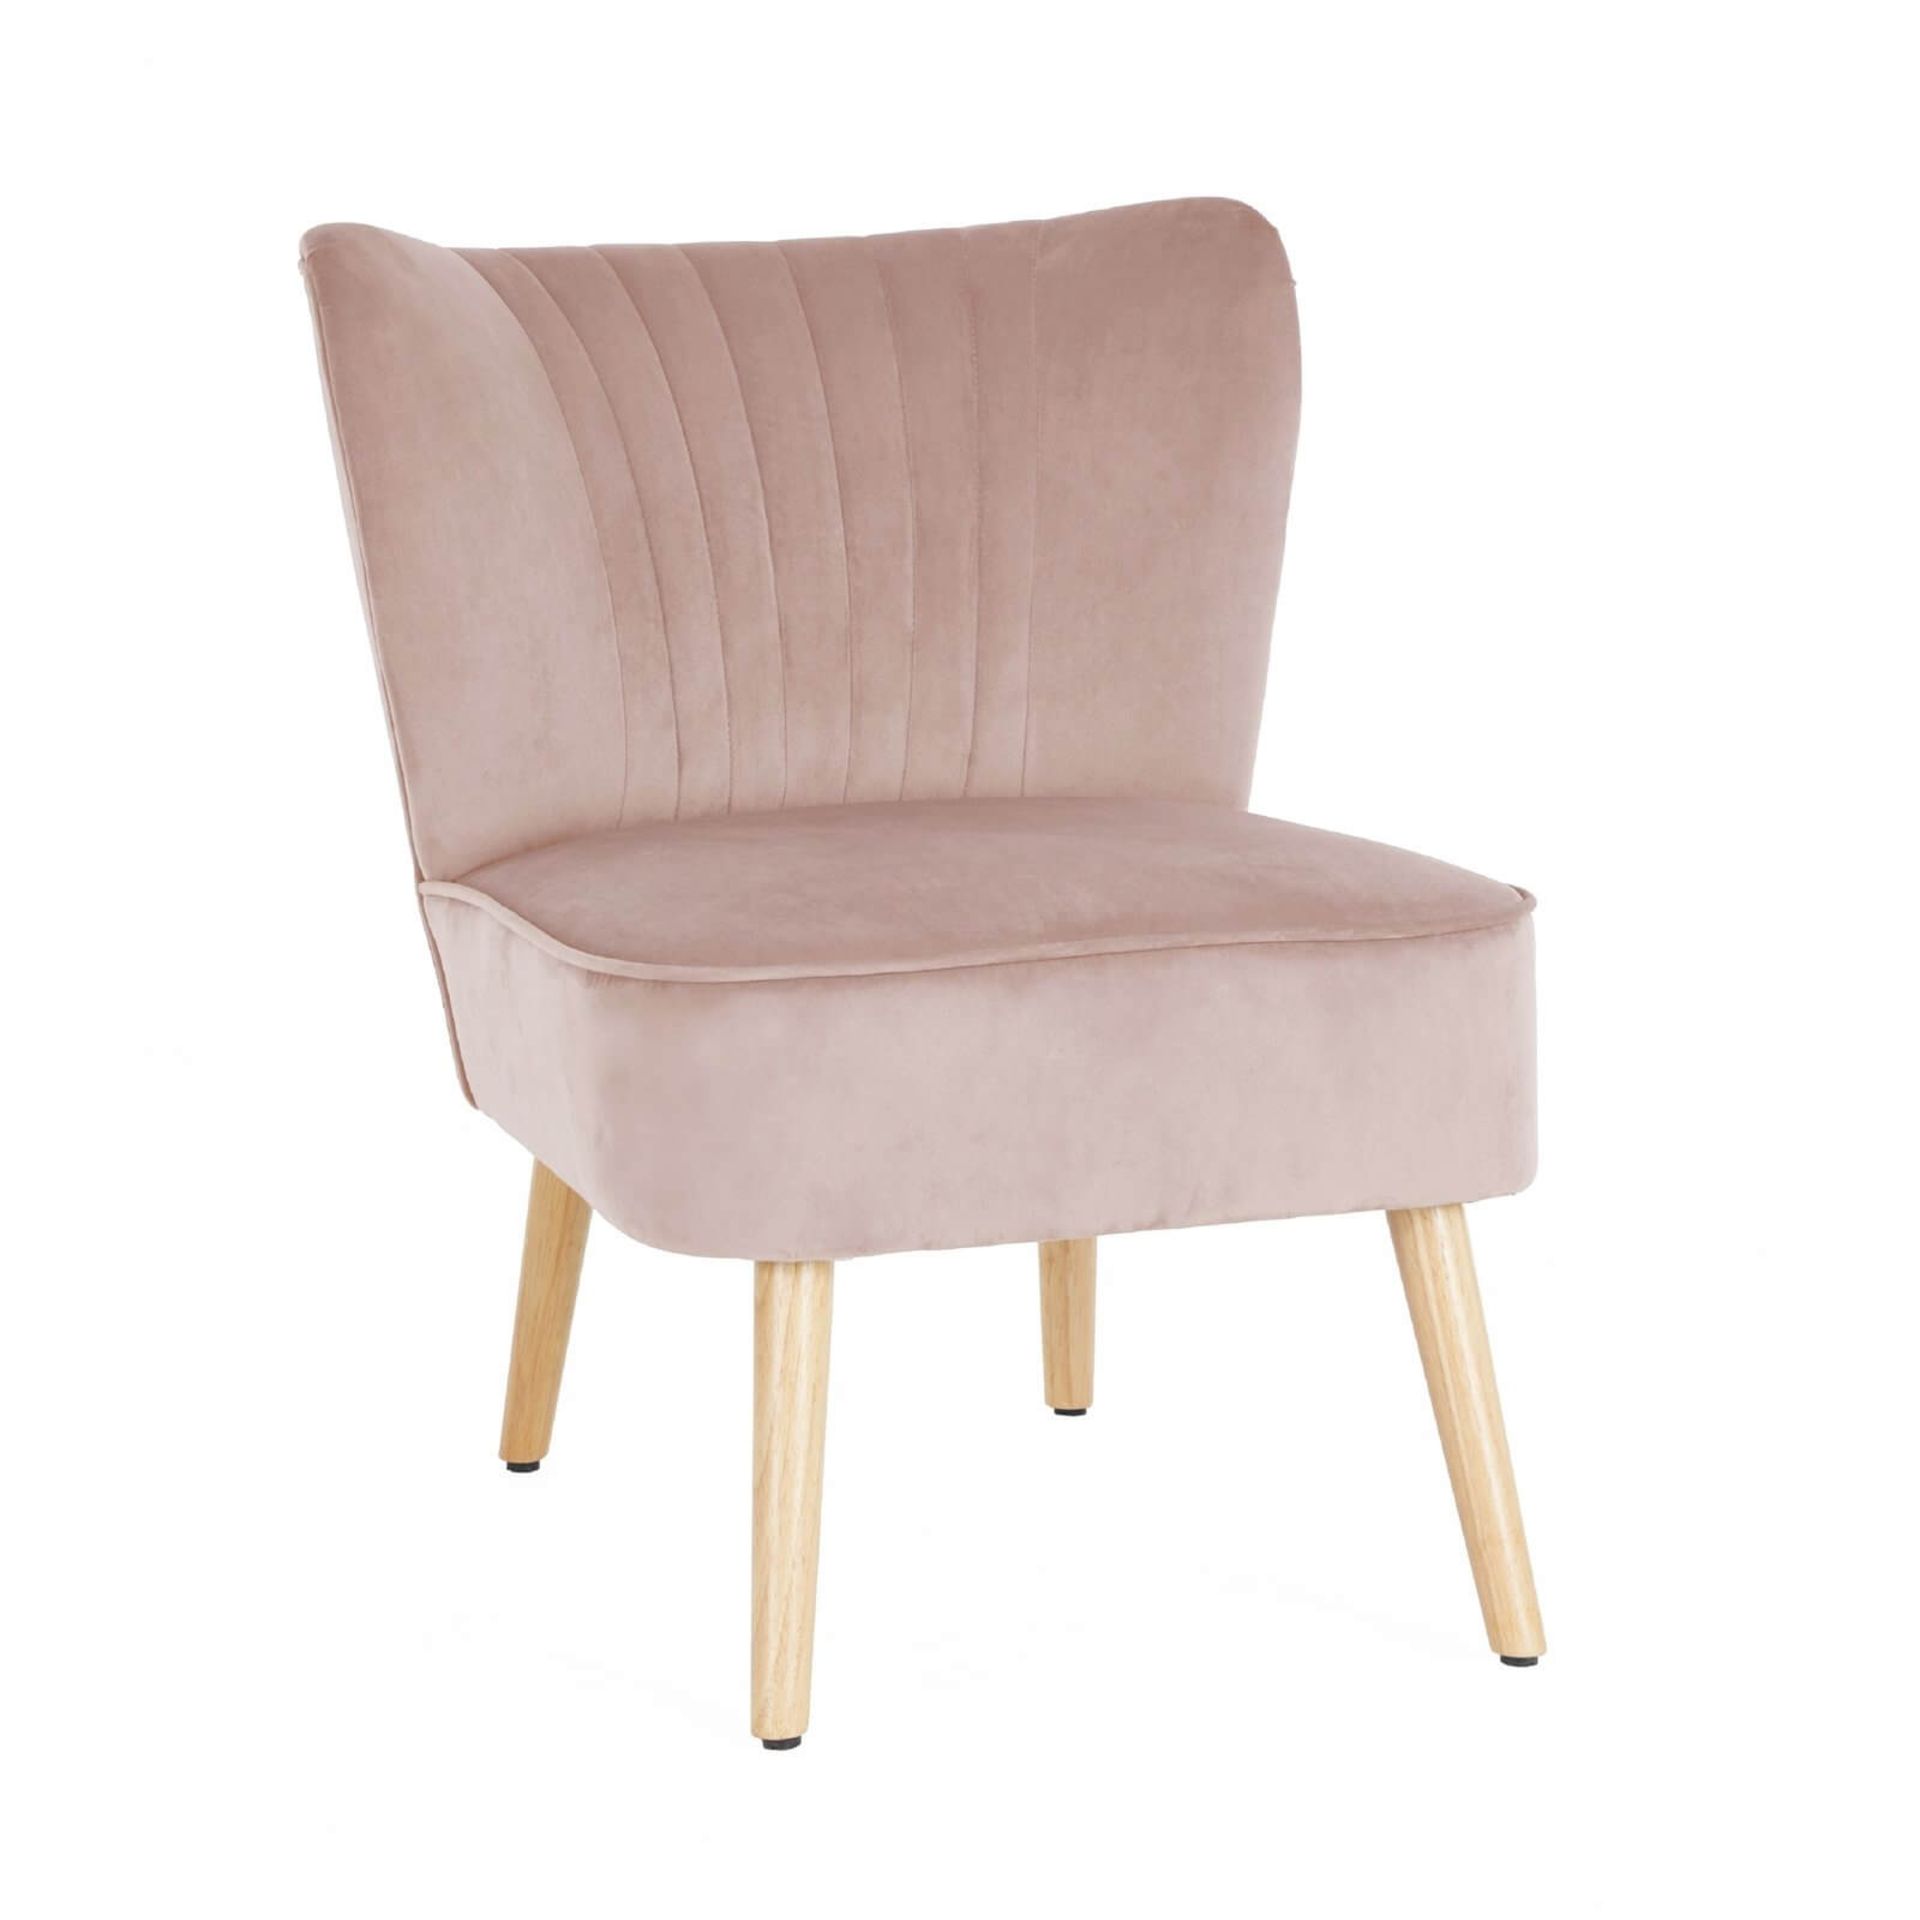 (R3P) 1 X Sophia Occasional Chair Blush. Velvet Fabric Cover With Metal Legs. (H77xW64xD71cm)